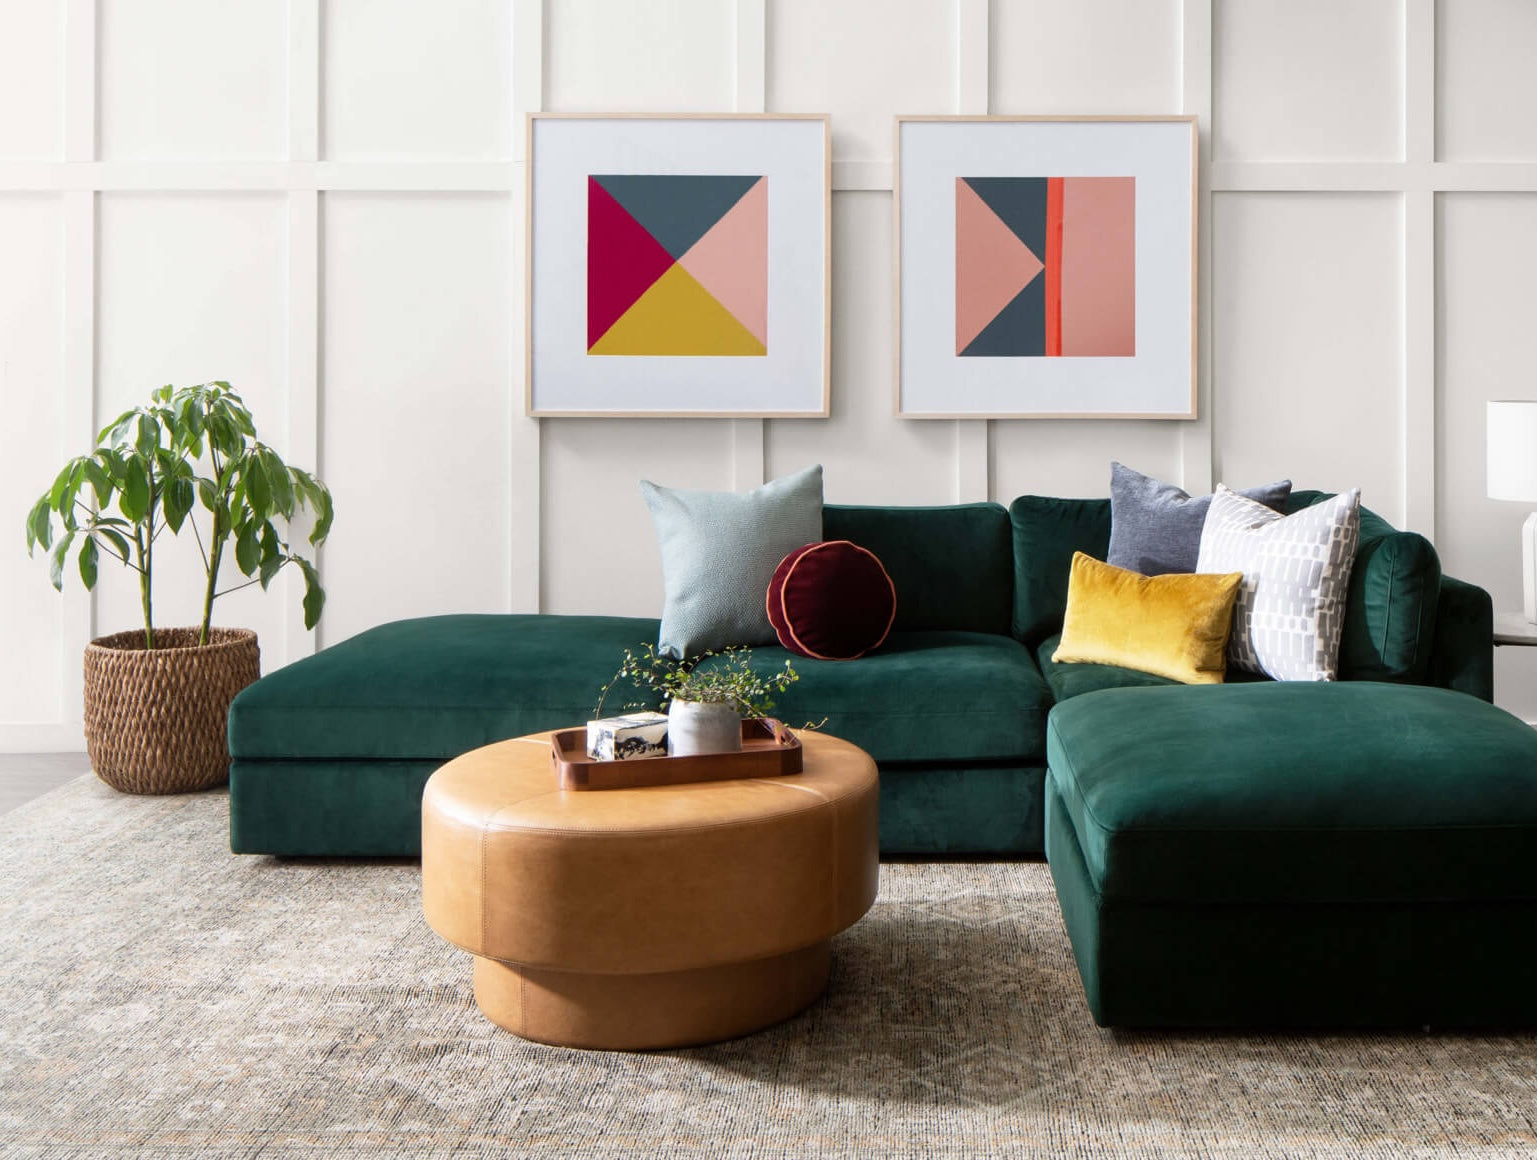 A modern living room features a dark green sectional sofa adorned with assorted cushions, a brown round coffee table with a plant on top, and two colorful geometric prints on the wall. A potted plant sits to the left, and the room has a patterned neutral rug.